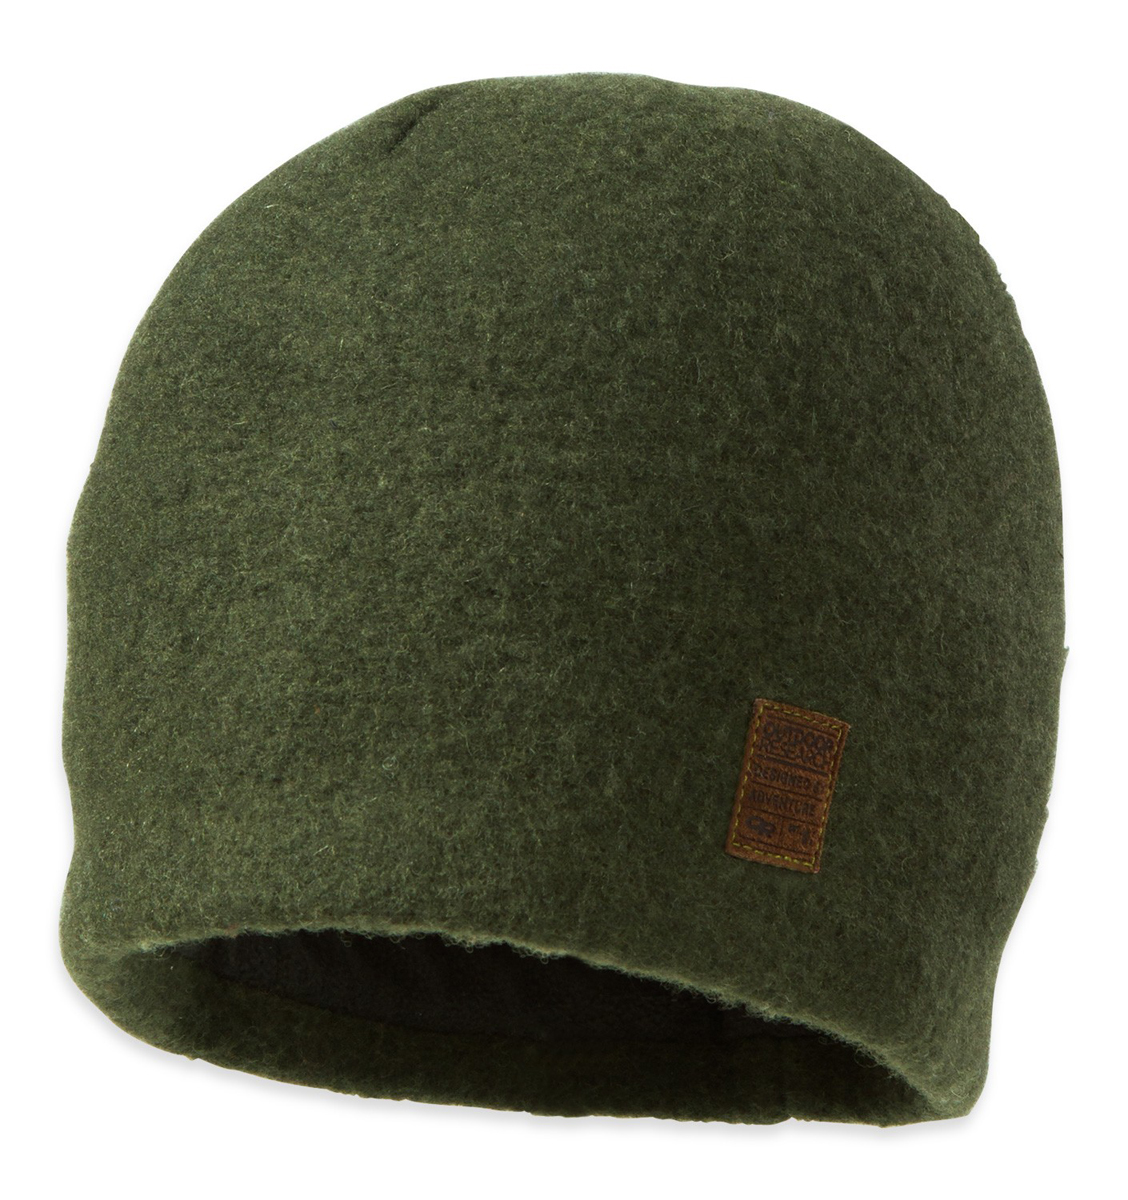 Outdoor Research Whiskey Peak Beanie 86261